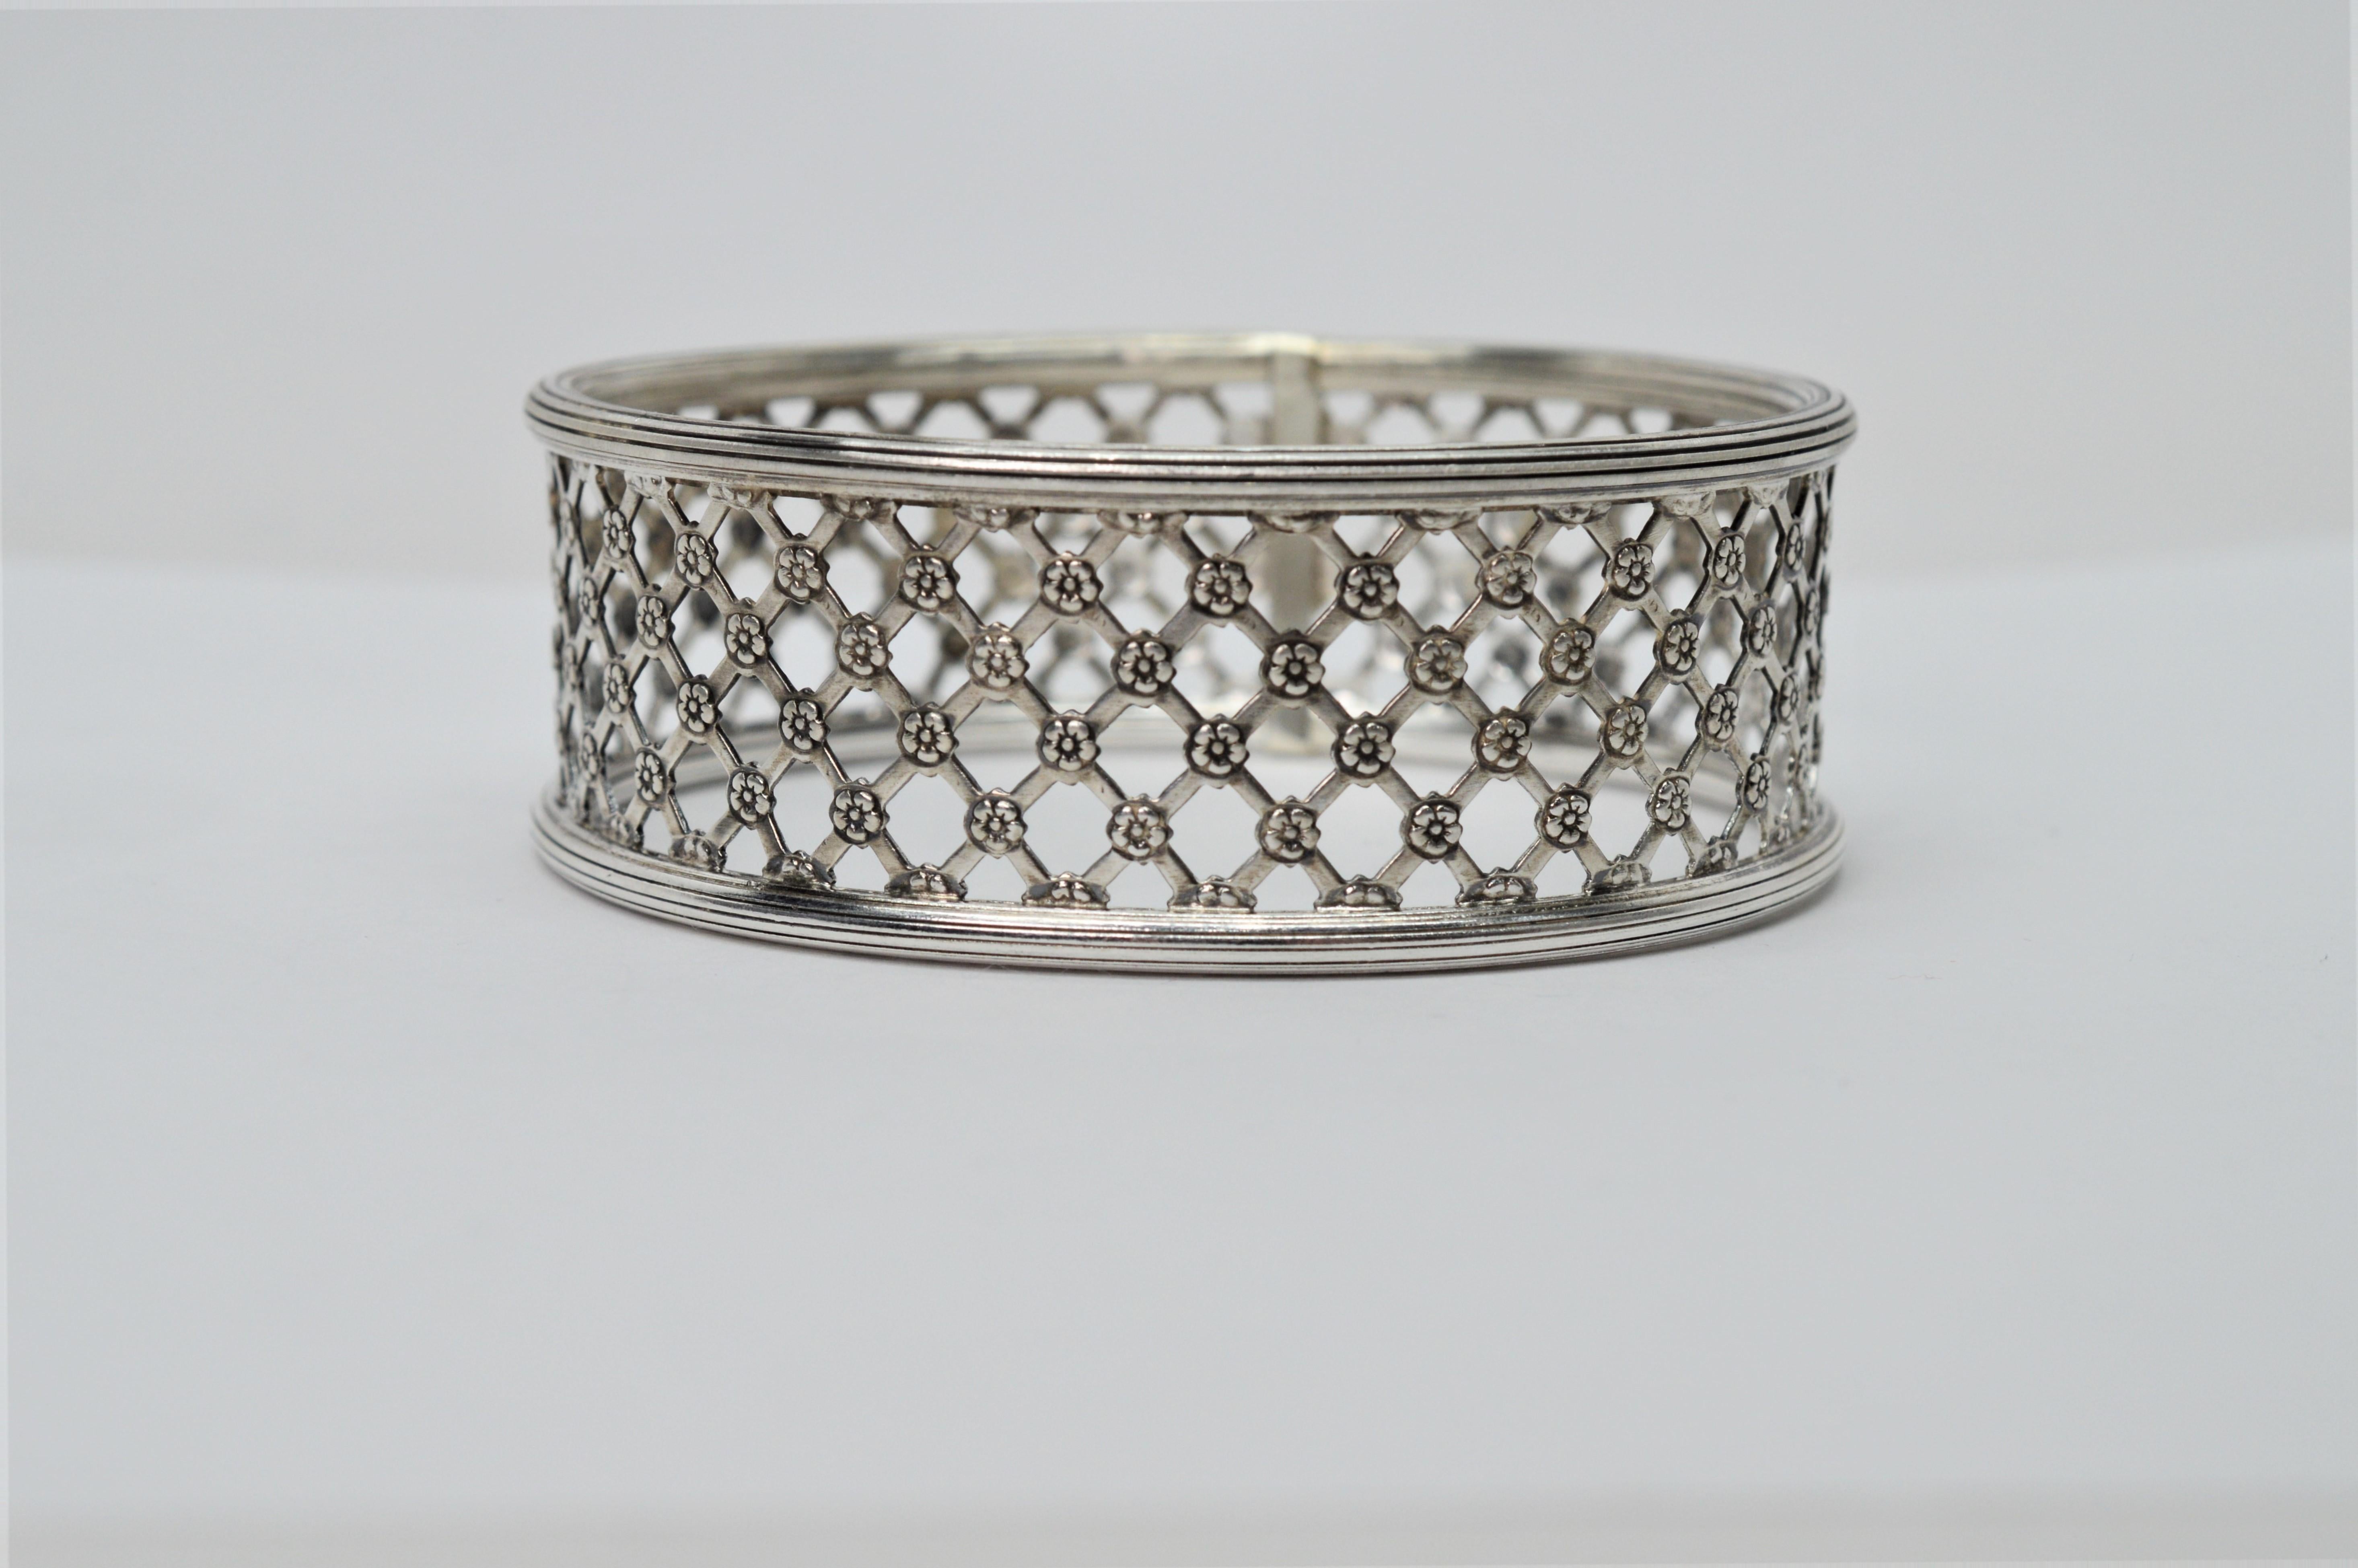 An open lattice pattern appointed with floral accents creates a unique lacey design to this substantial sterling silver artisan bangle bracelet. Crafted of heavier gauge reclaimed sterling silver and trimmed with a rim of silver atop and bottom by